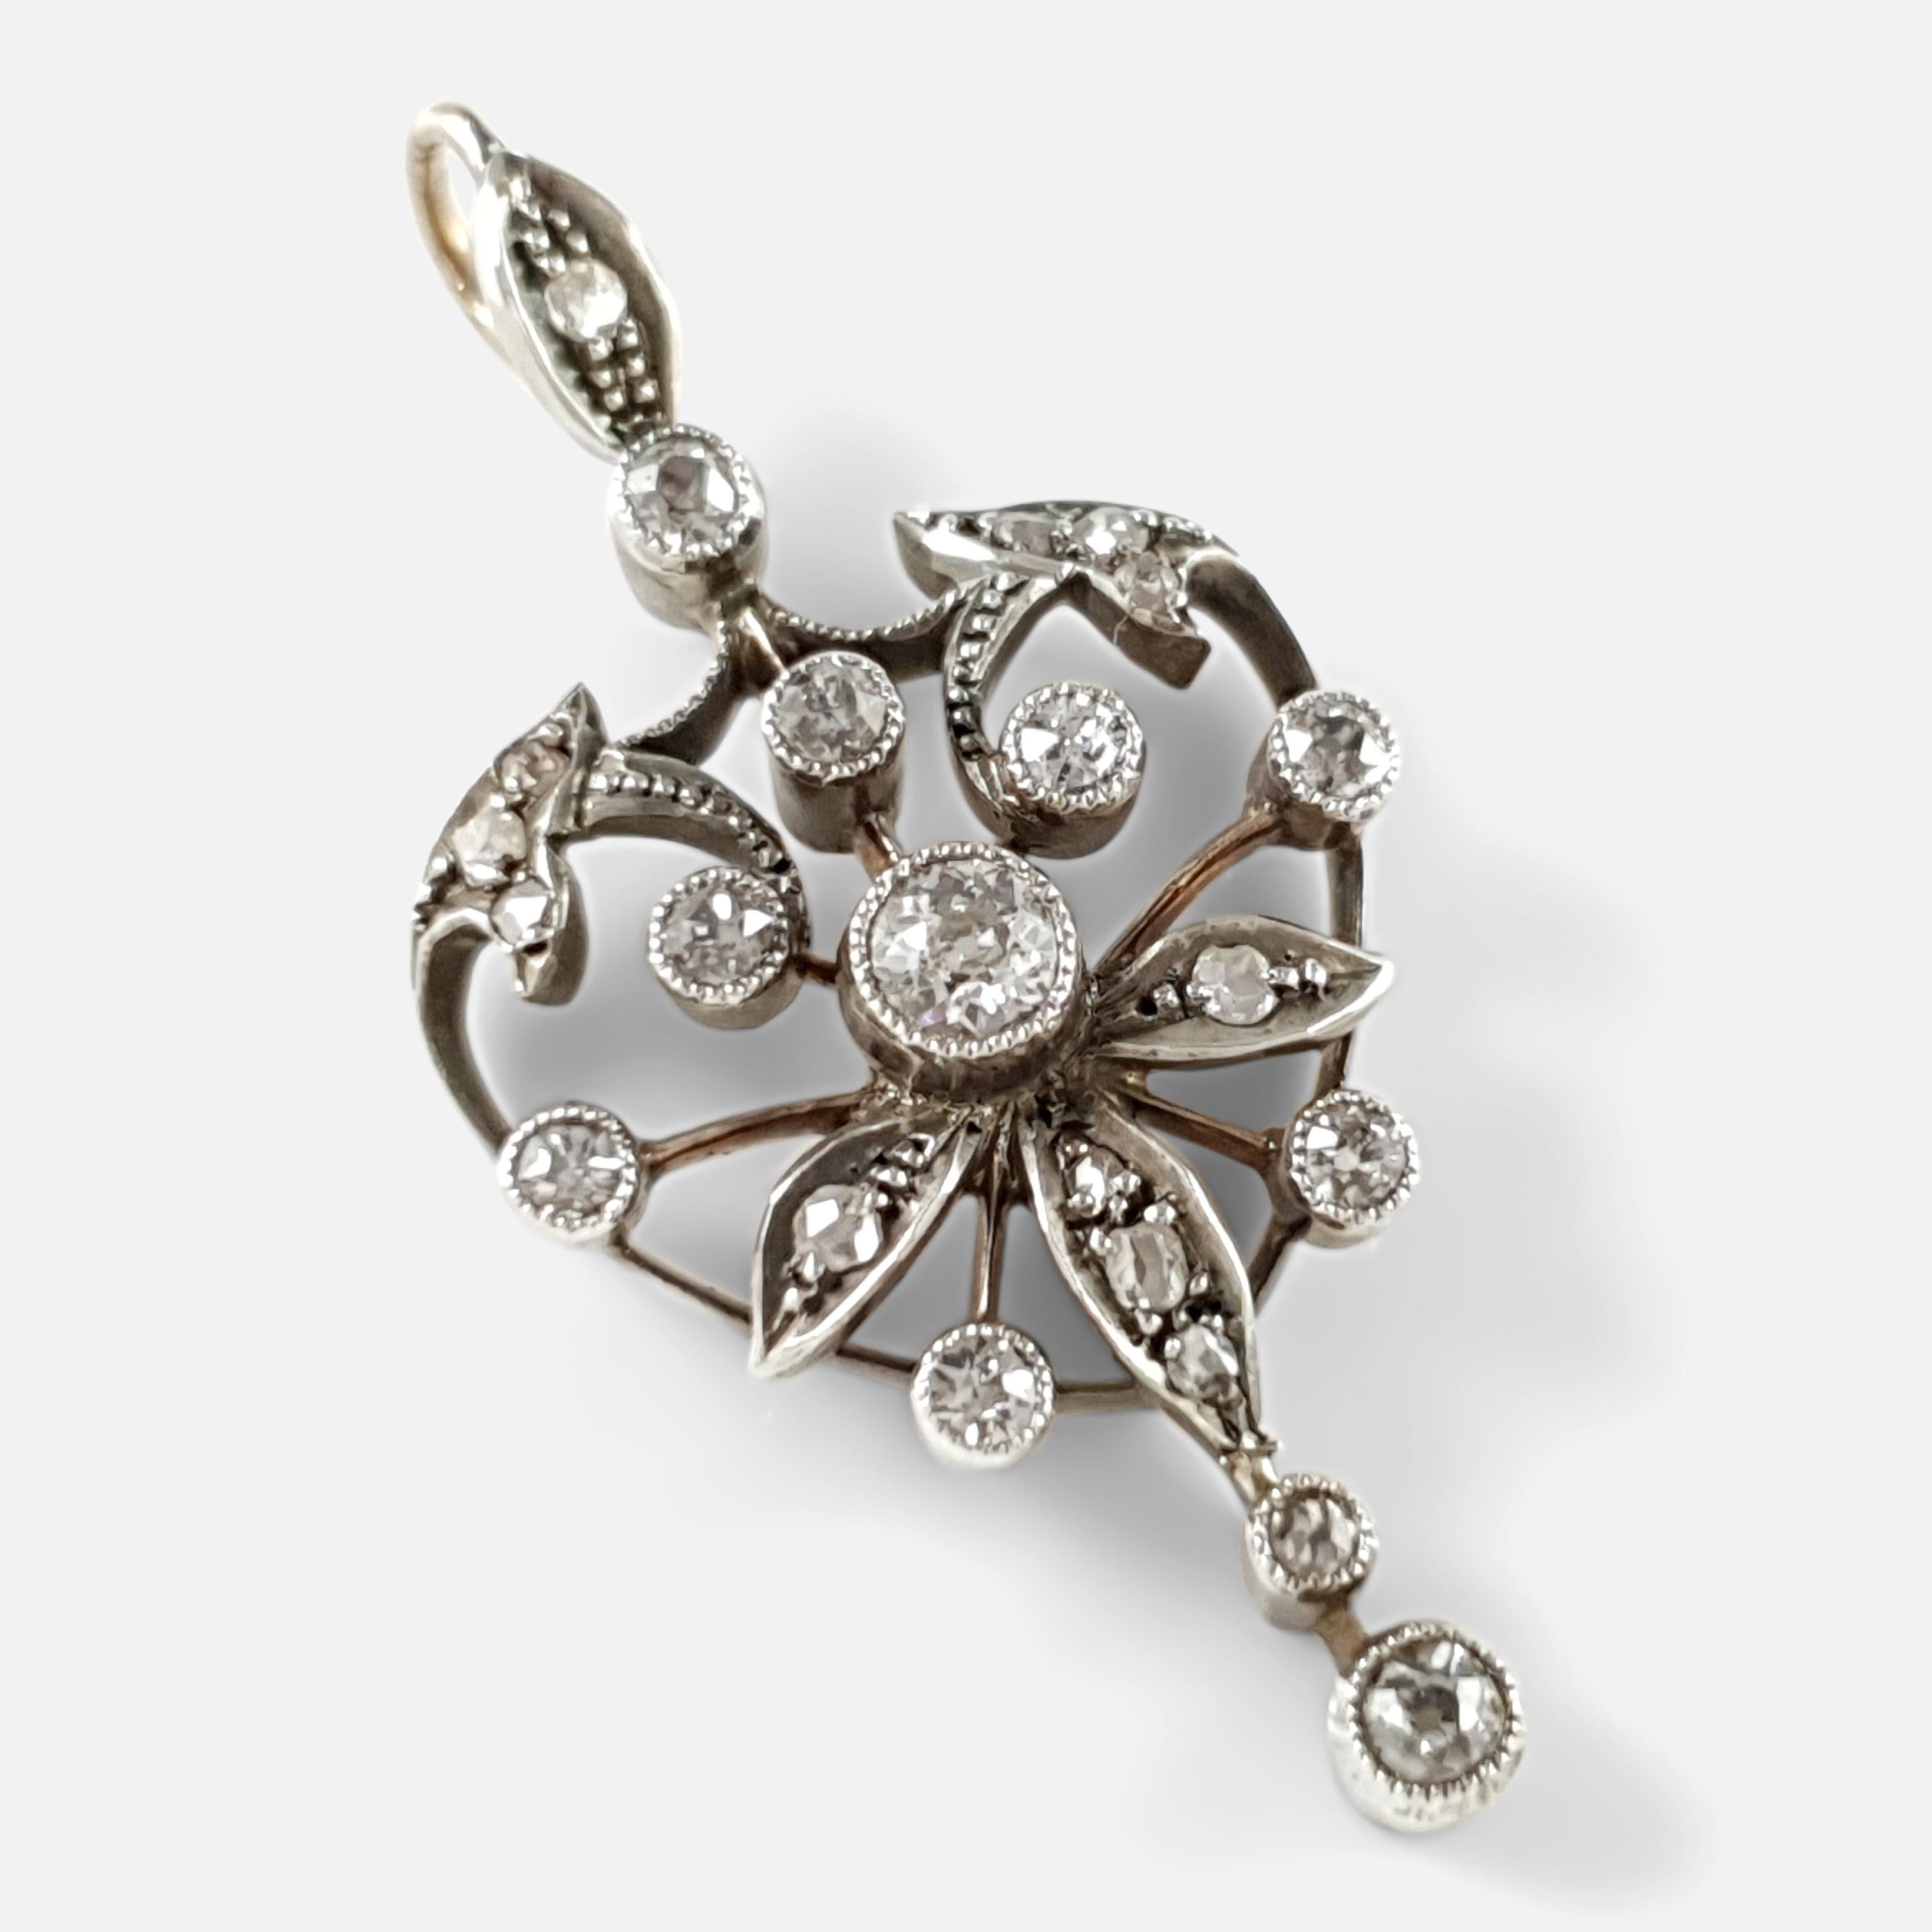 A late Victorian 0.57ct diamond pendant. The silver fronted and gold backed pendant is designed as an openwork heart-shaped foliate panel, with graduated old and lasque-cut diamonds in millegrain and grain settings, suspending a similarly set drop.